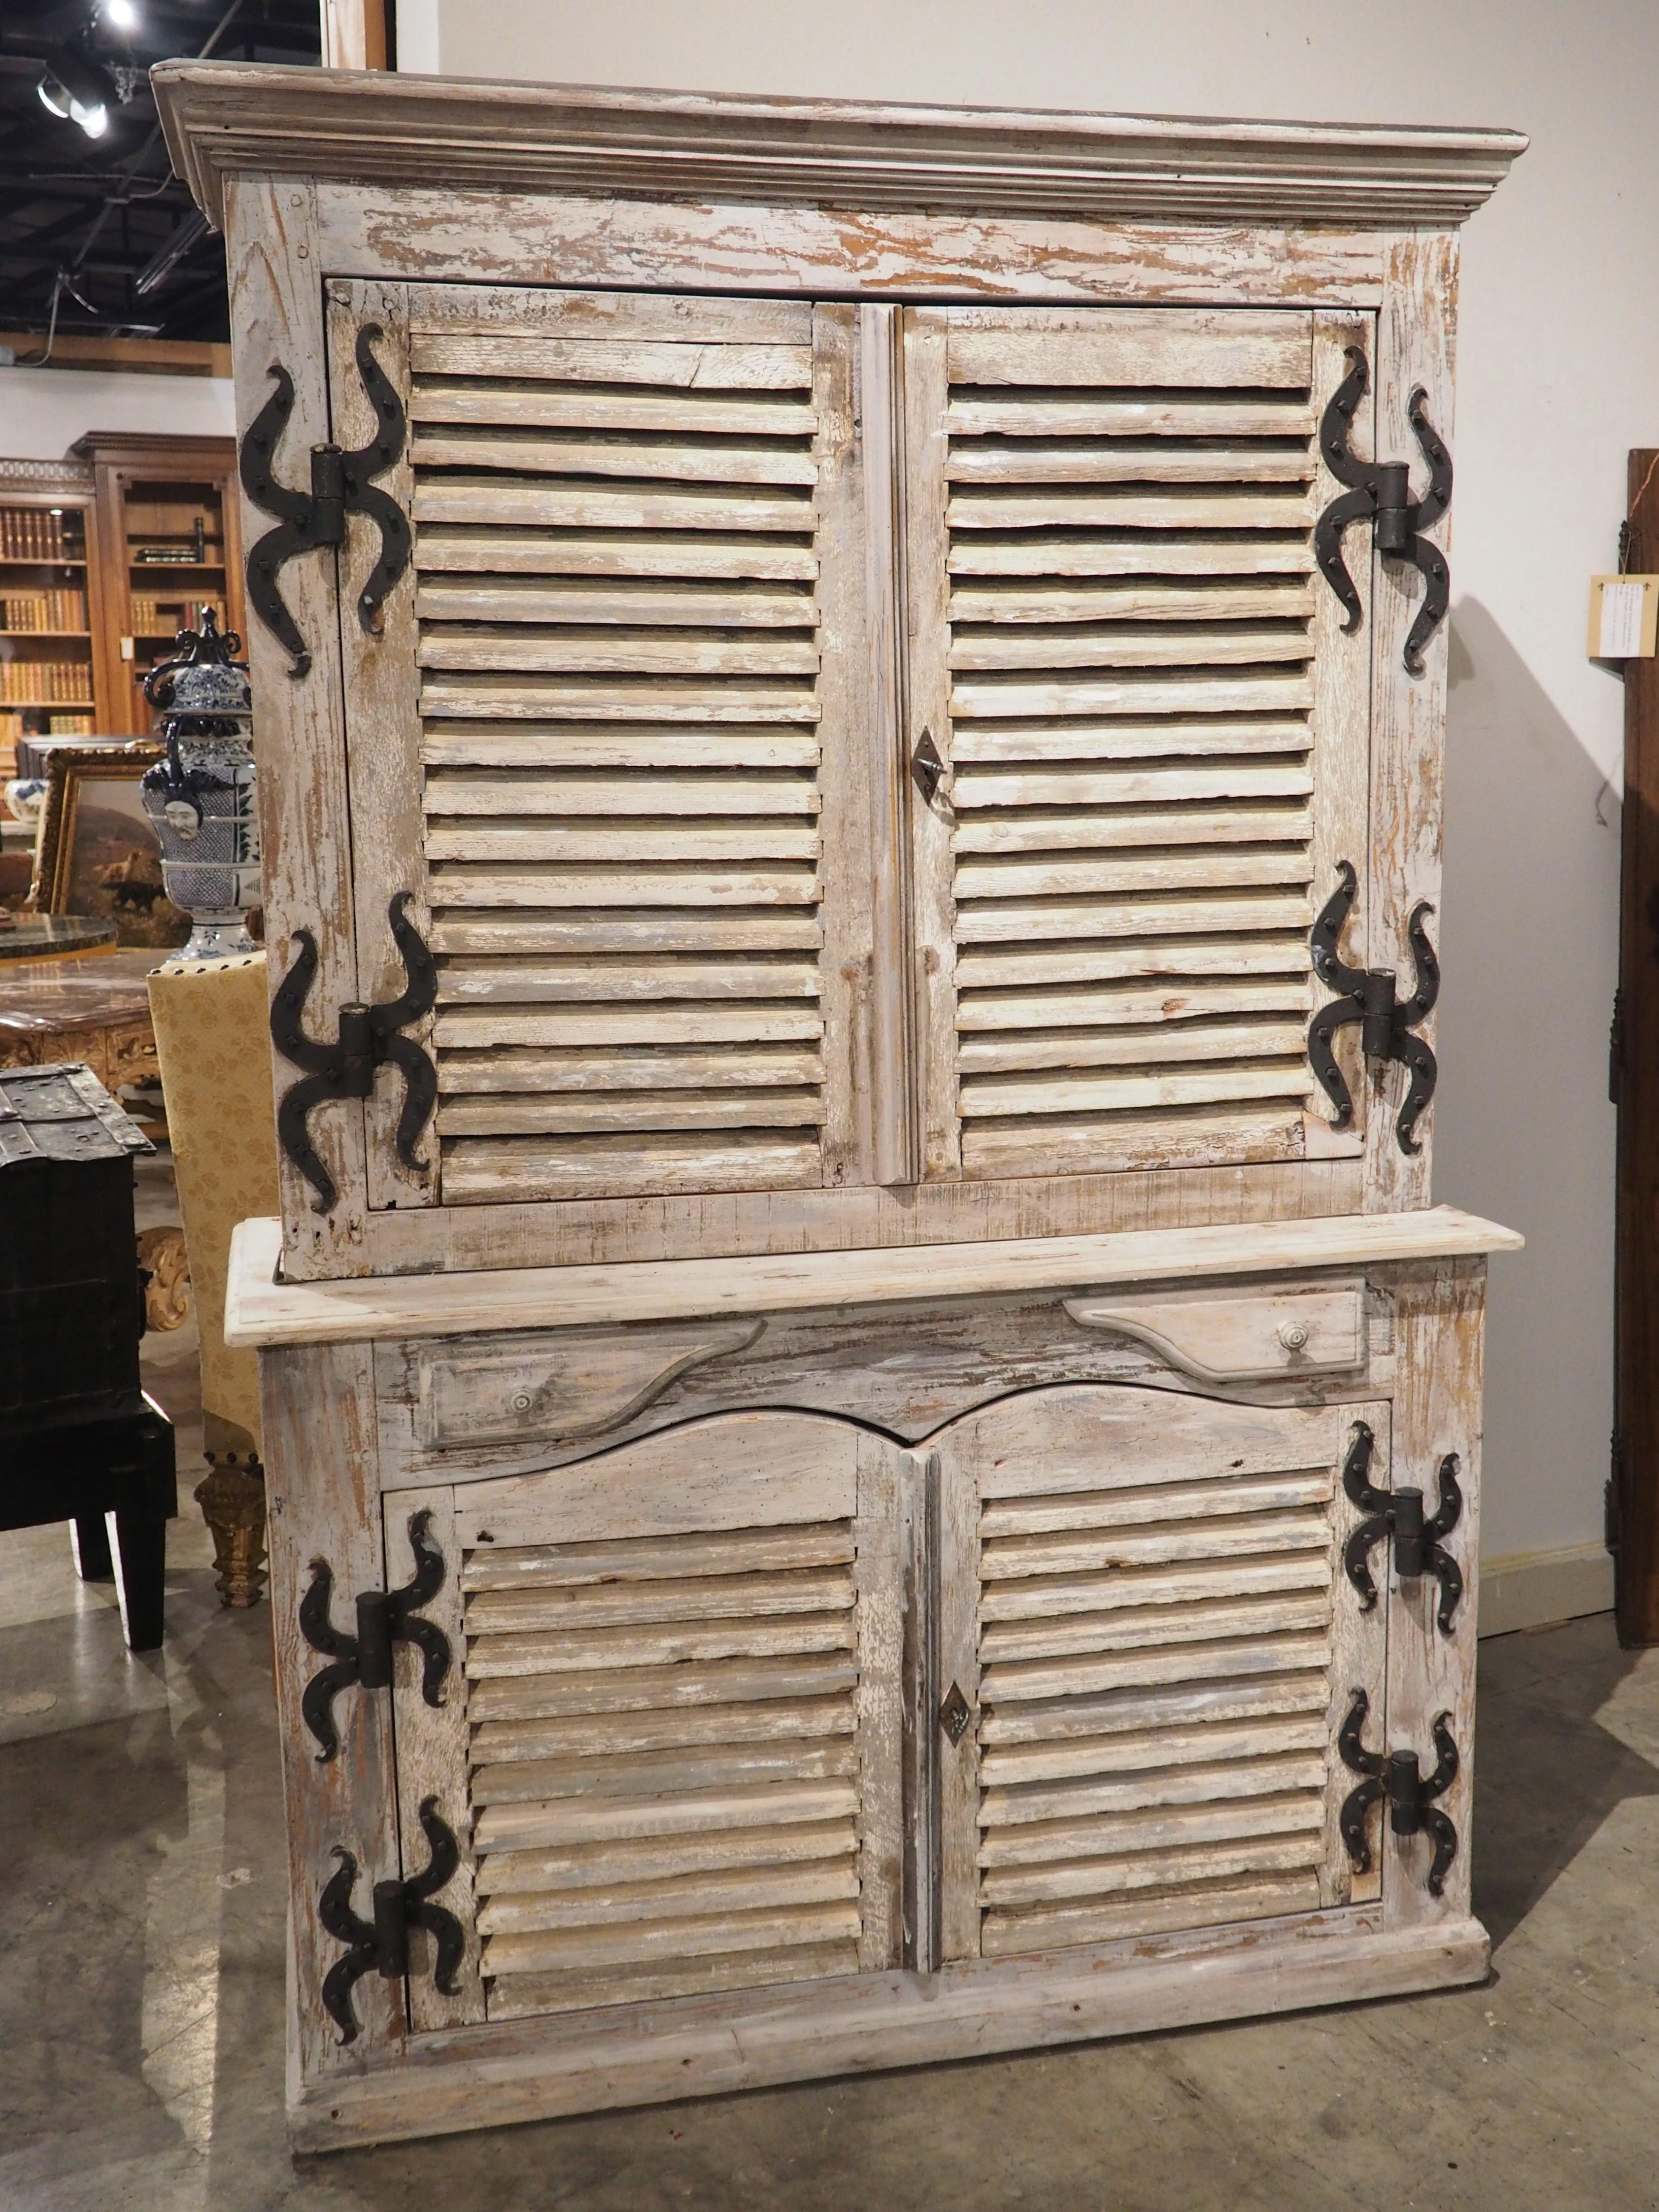 Assembled by a French artisan, this painted buffet has incorporated two pairs of antique shutter doors into the deux corps (two bodies) construction. The shutter doors open on four pintel hinges with uniquely shaped iron mounts. Both doors are